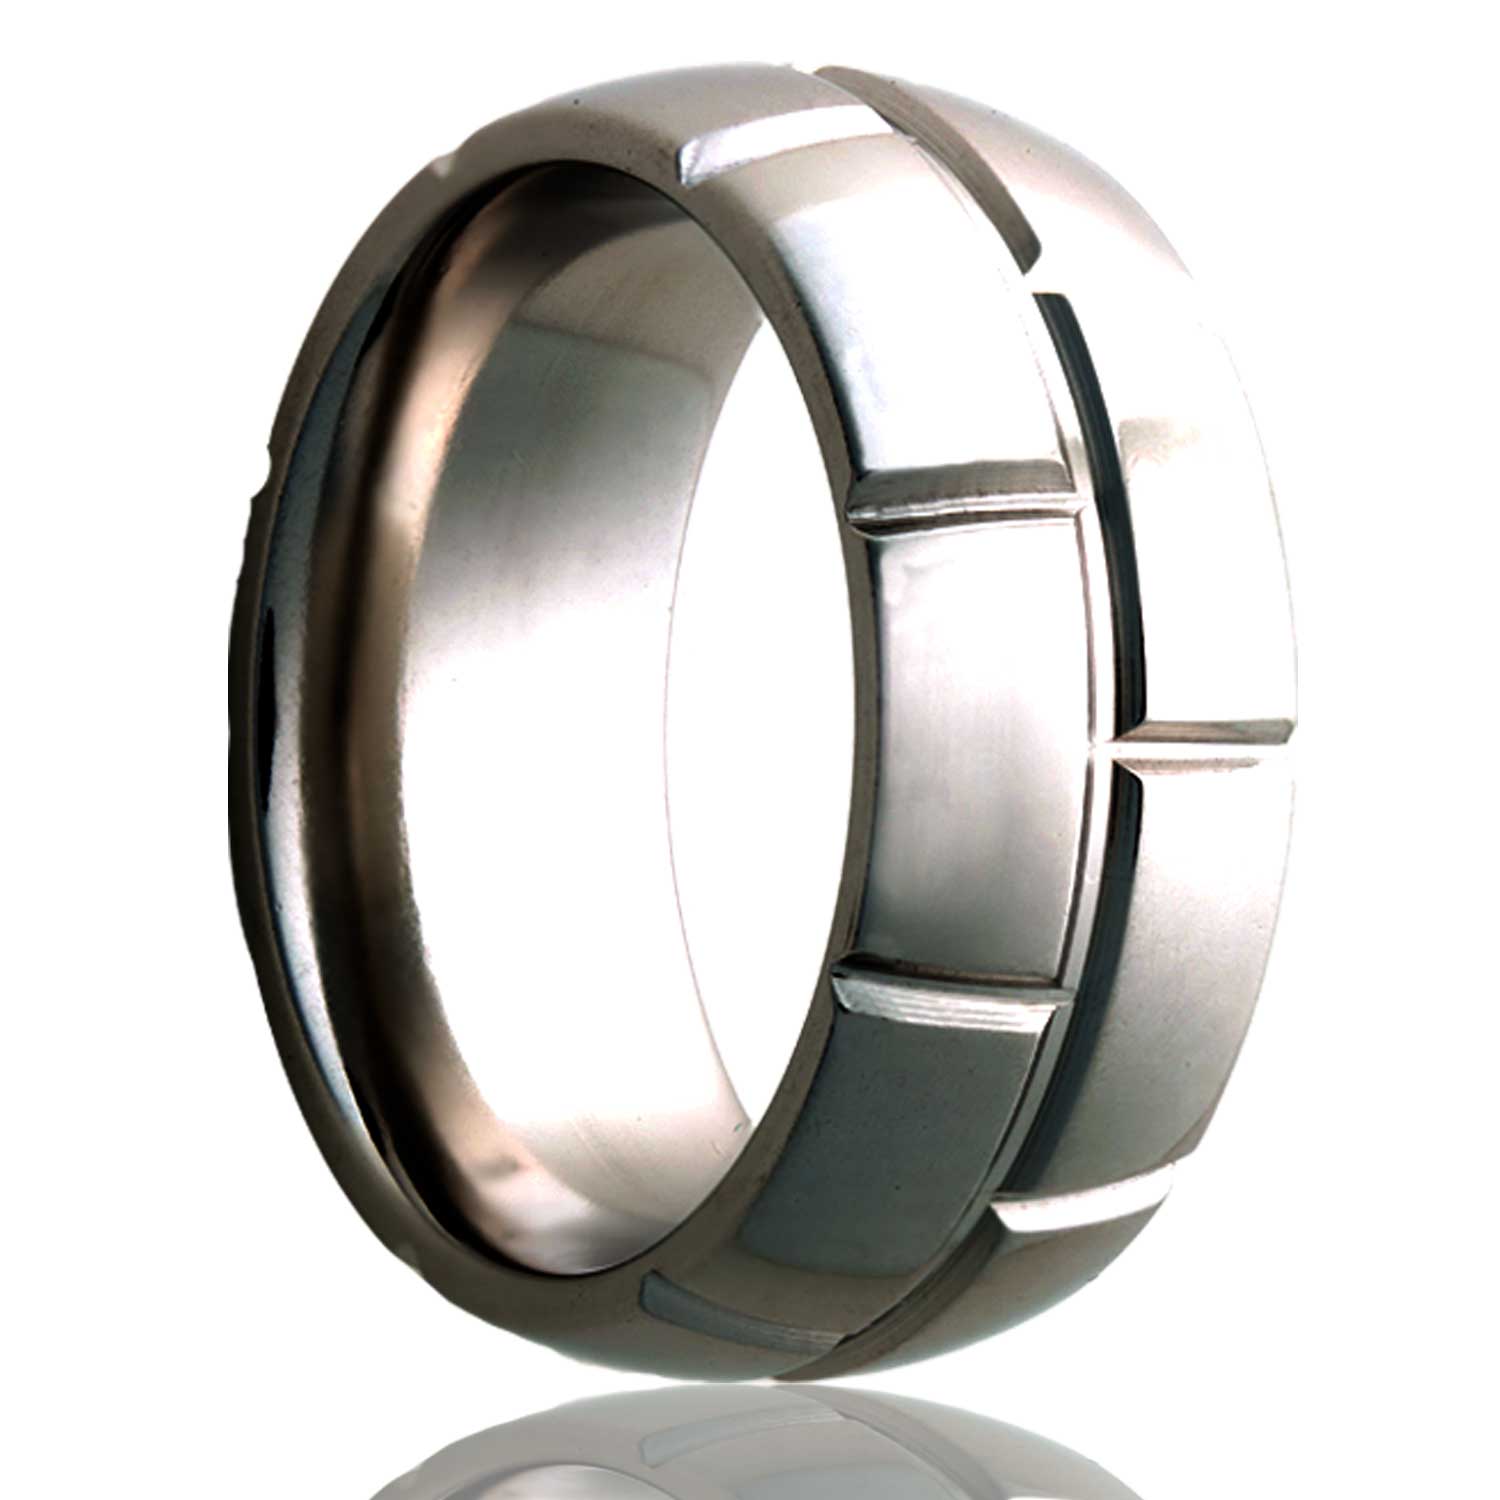 A brick grooved domed cobalt wedding band displayed on a neutral white background.